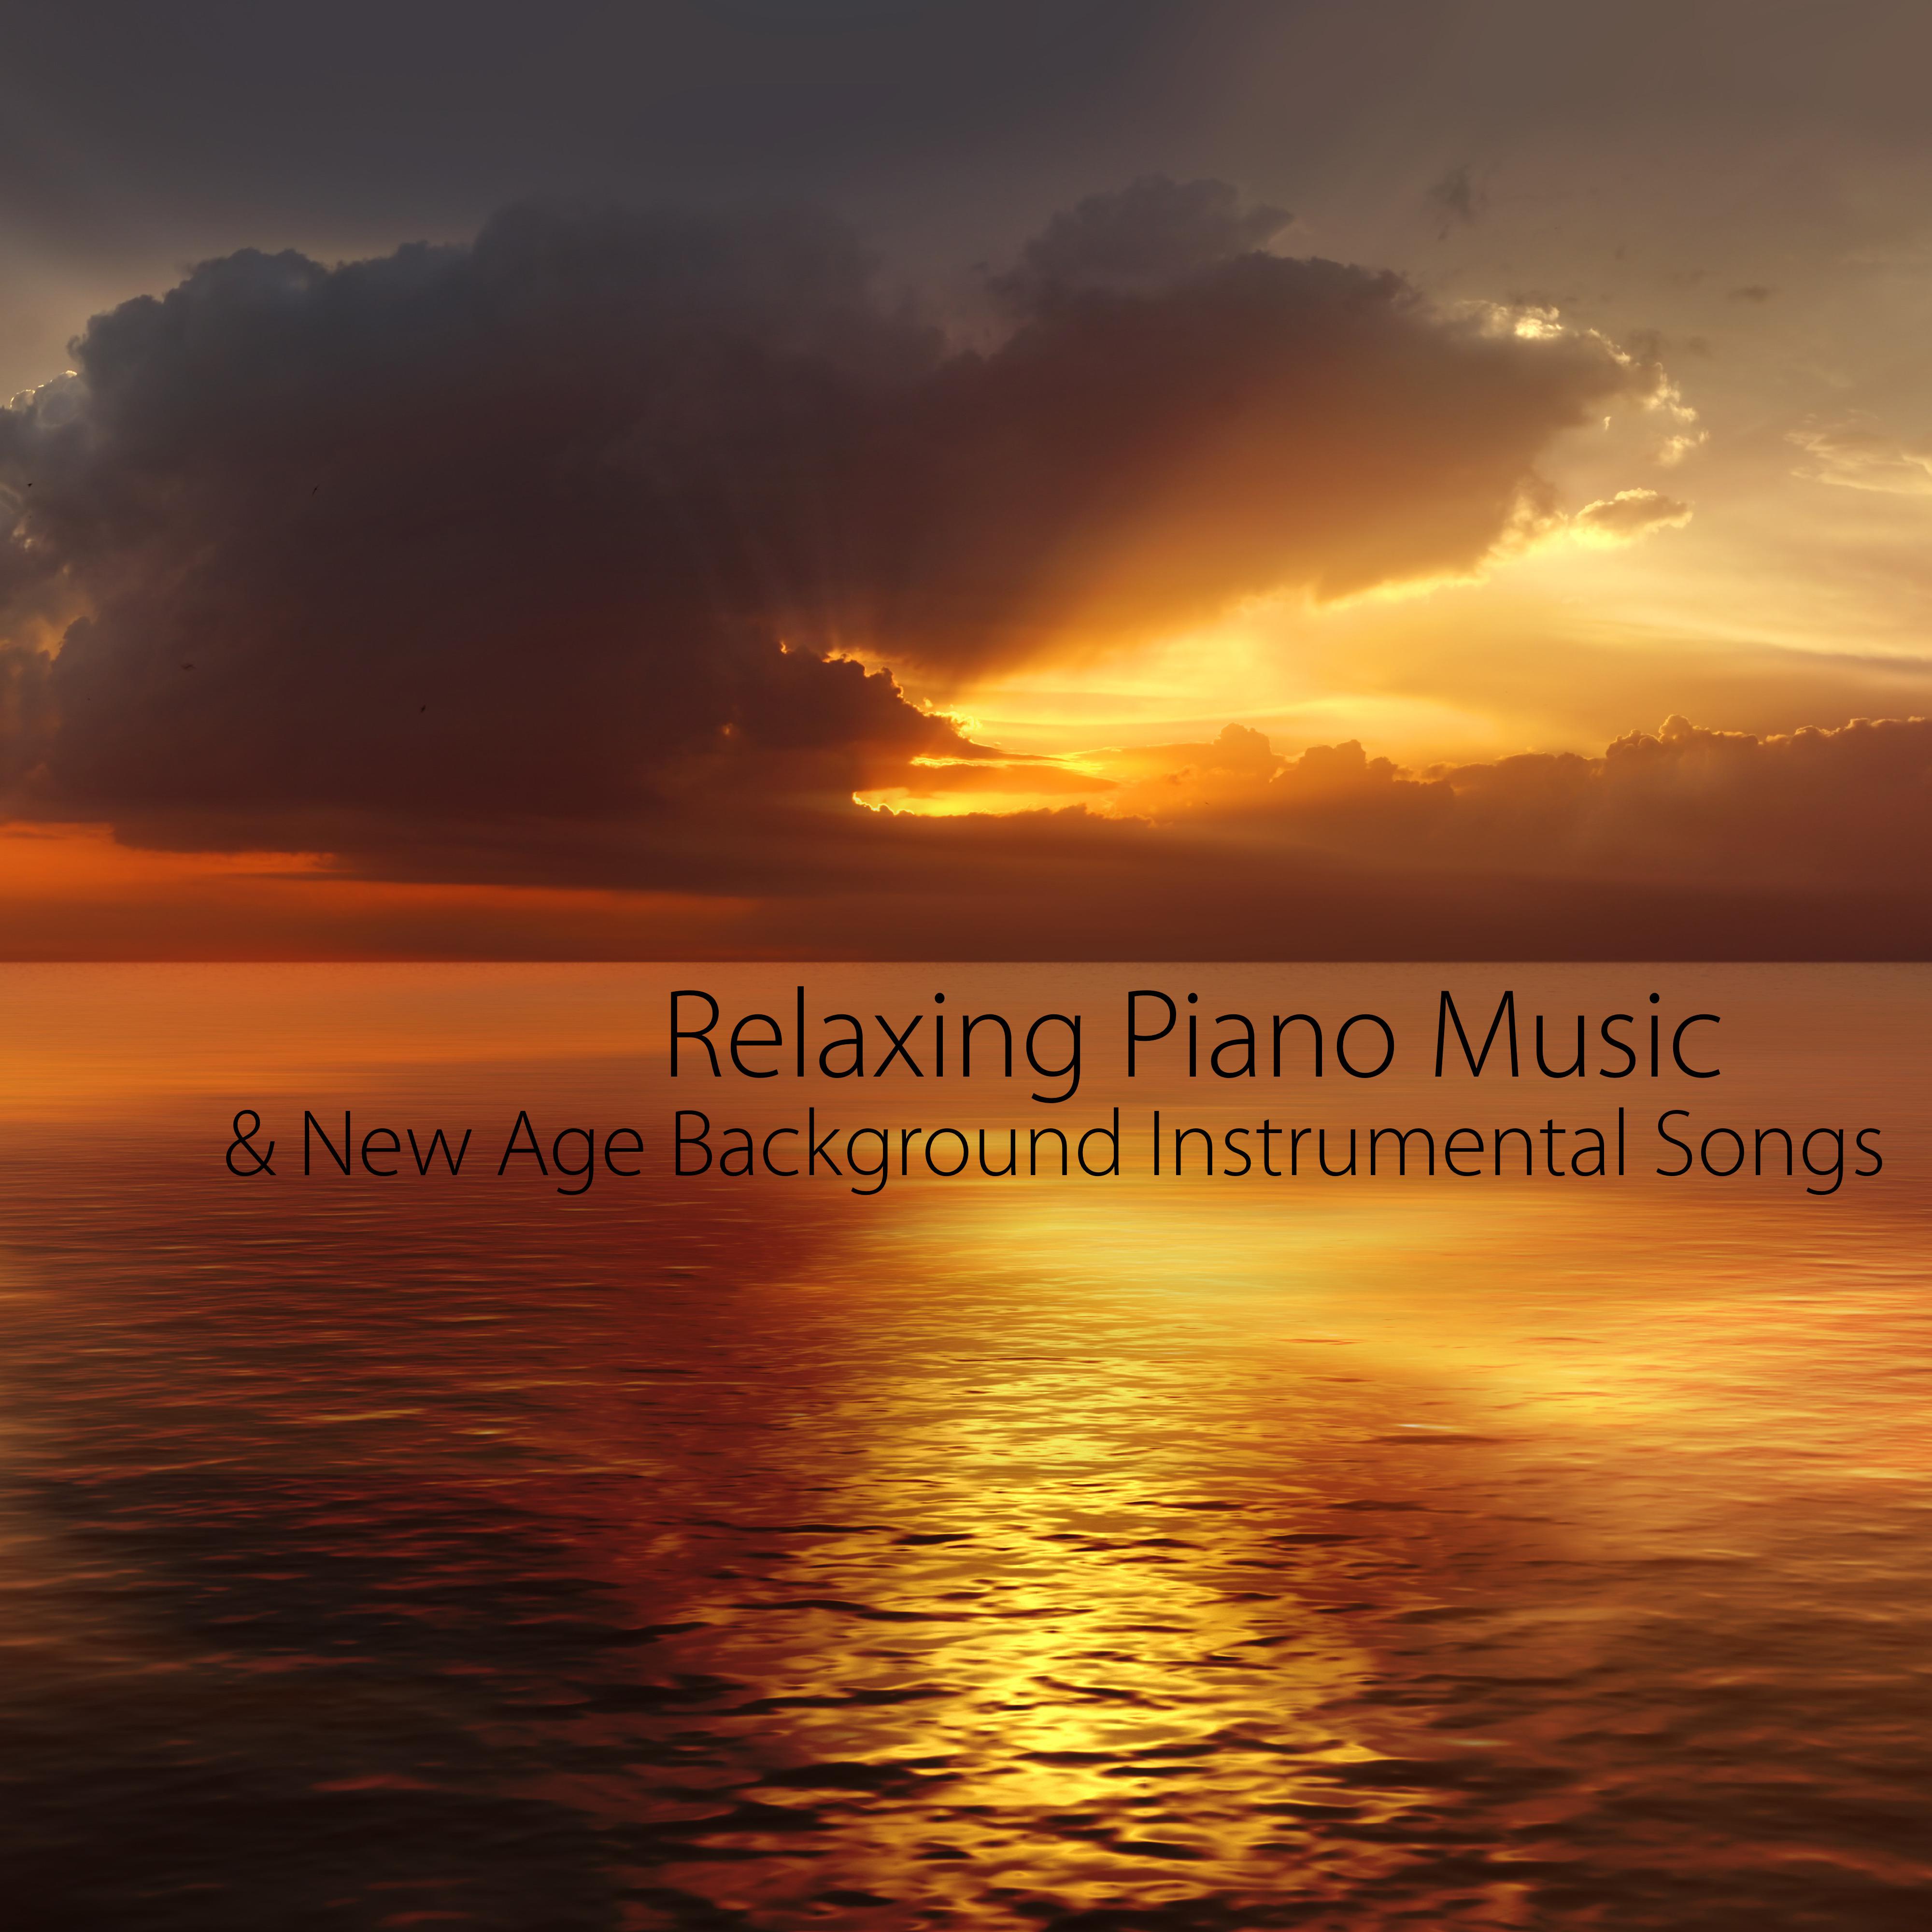 Relaxing Piano Music & New Age Background Instrumental Songs